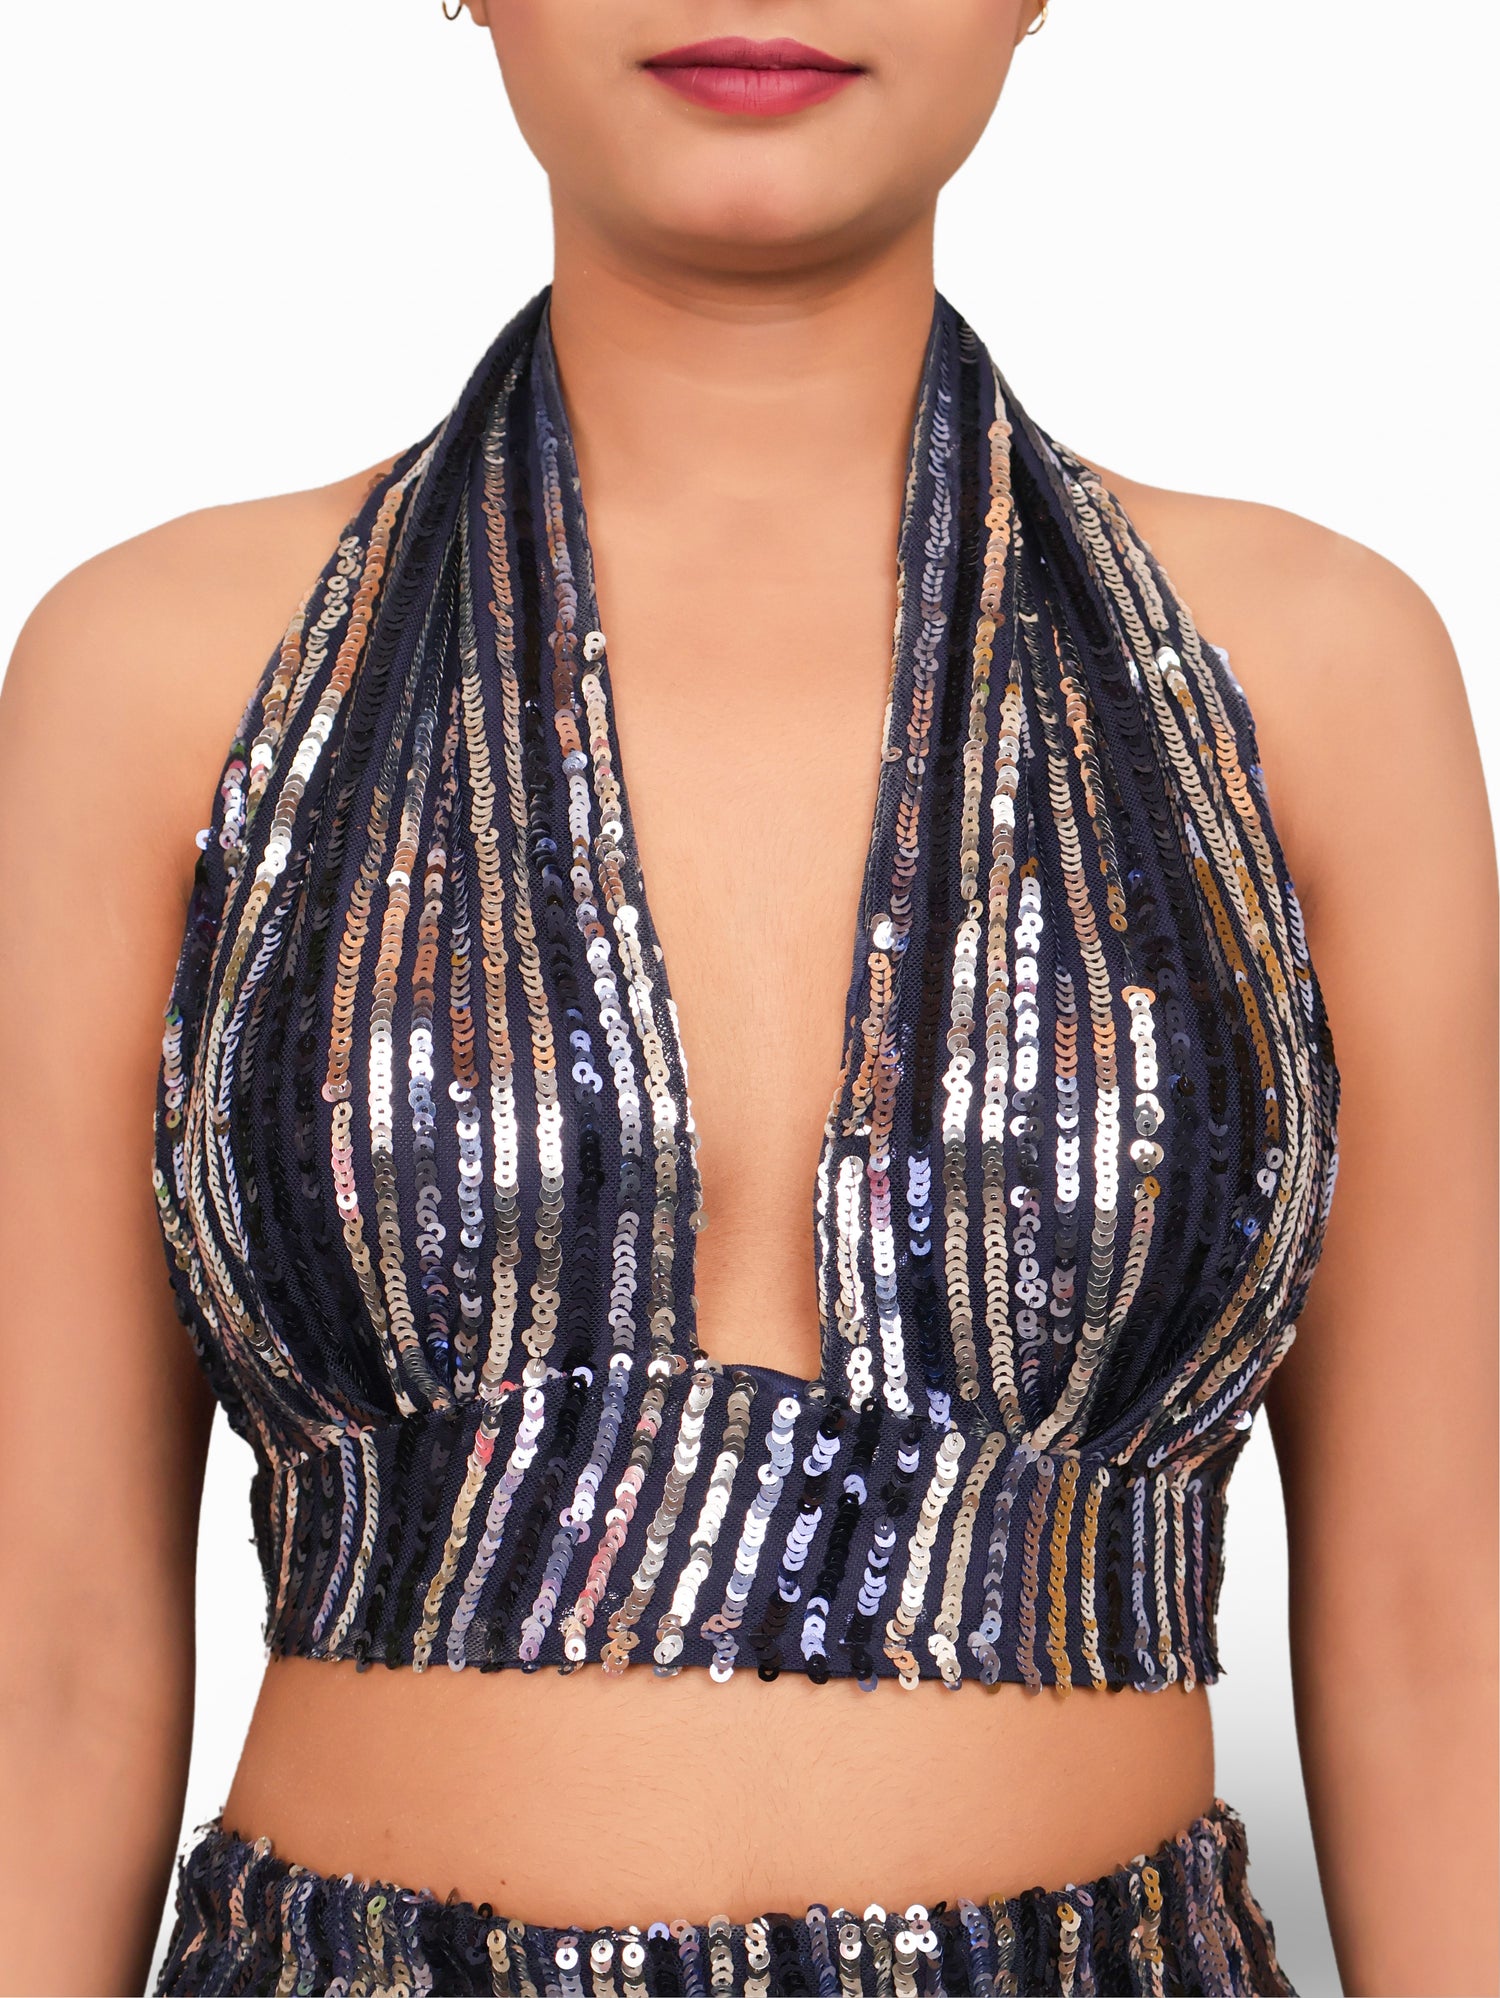 Glamour Halter Neck Sequins Bodycon Co-Ord Set by Shreekama Navy Blue Dress for Party Festival Wedding Occasion in Noida